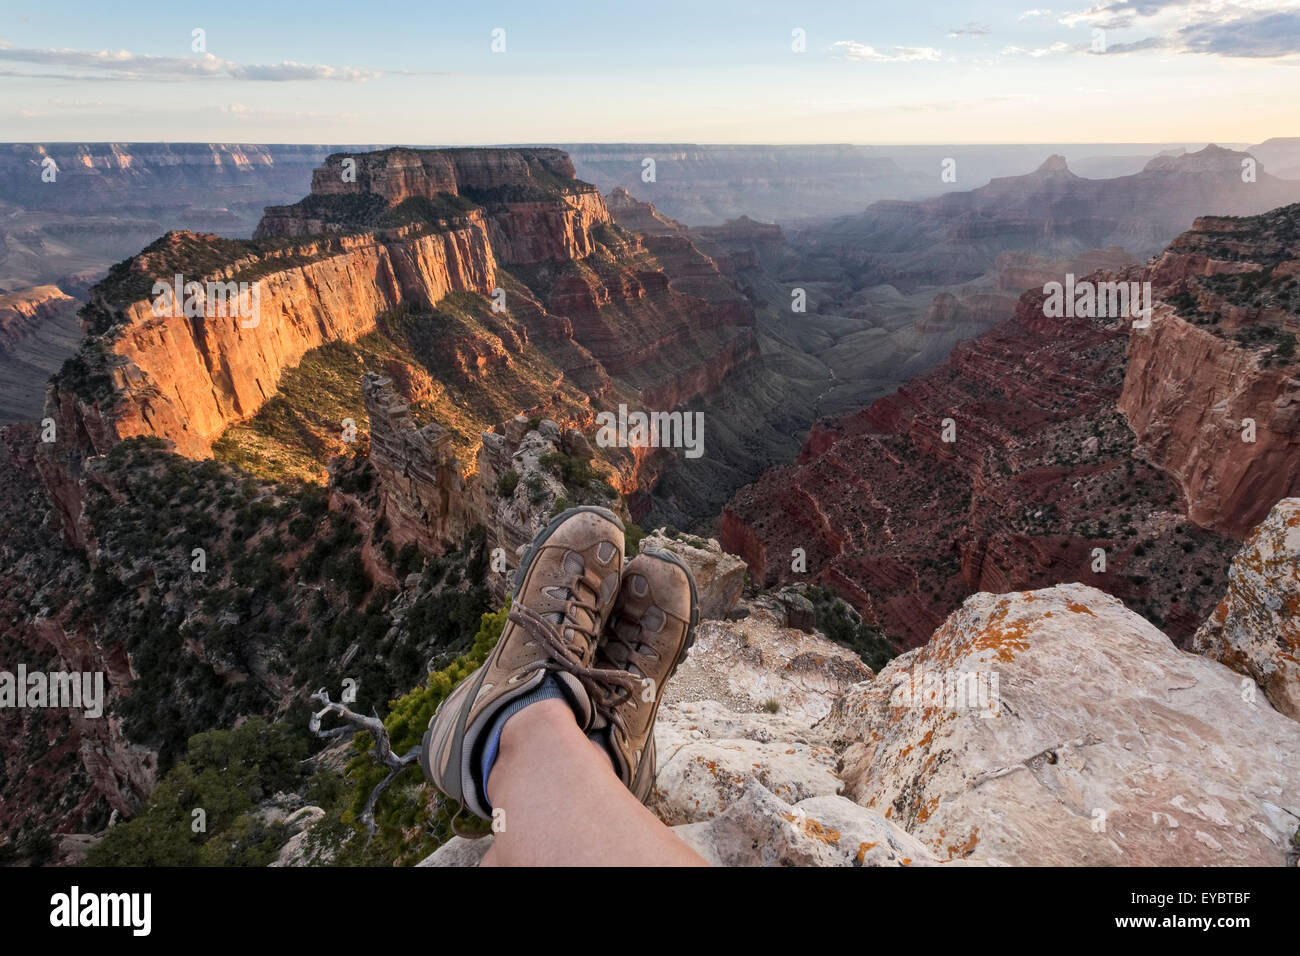 Person sitting showing feet only with hiking boots on, Grand Canyon National Park, North Rim, Arizona Stock Photo